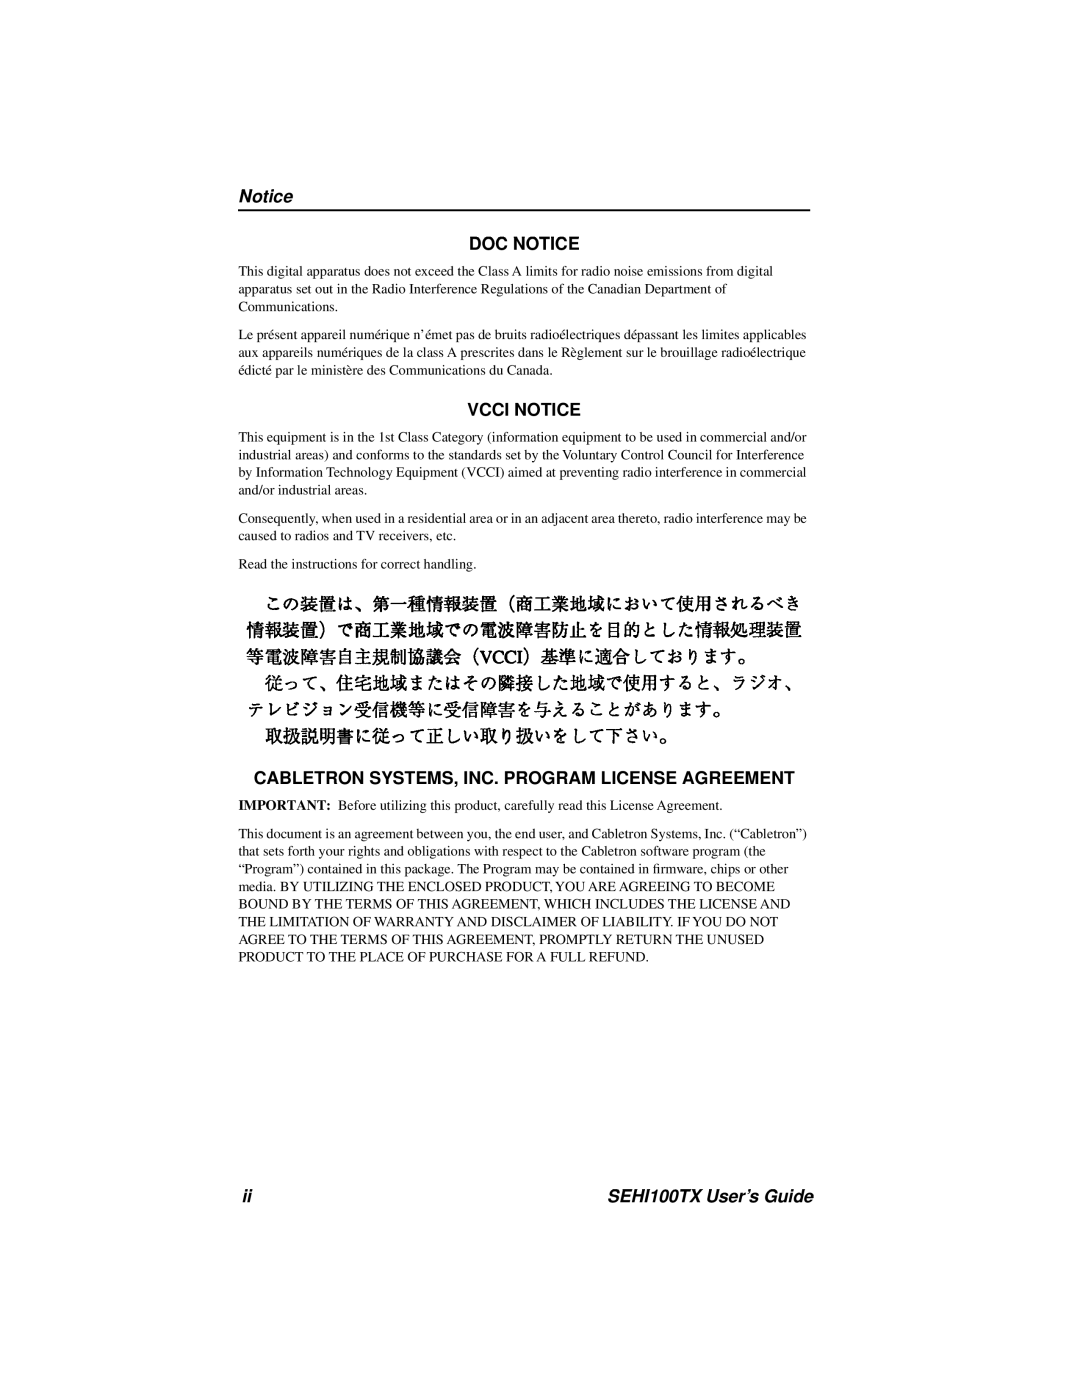 Cabletron Systems SEHI100TX-22 manual Doc Notice, Vcci Notice, Cabletron Systems, Inc. Program License Agreement 